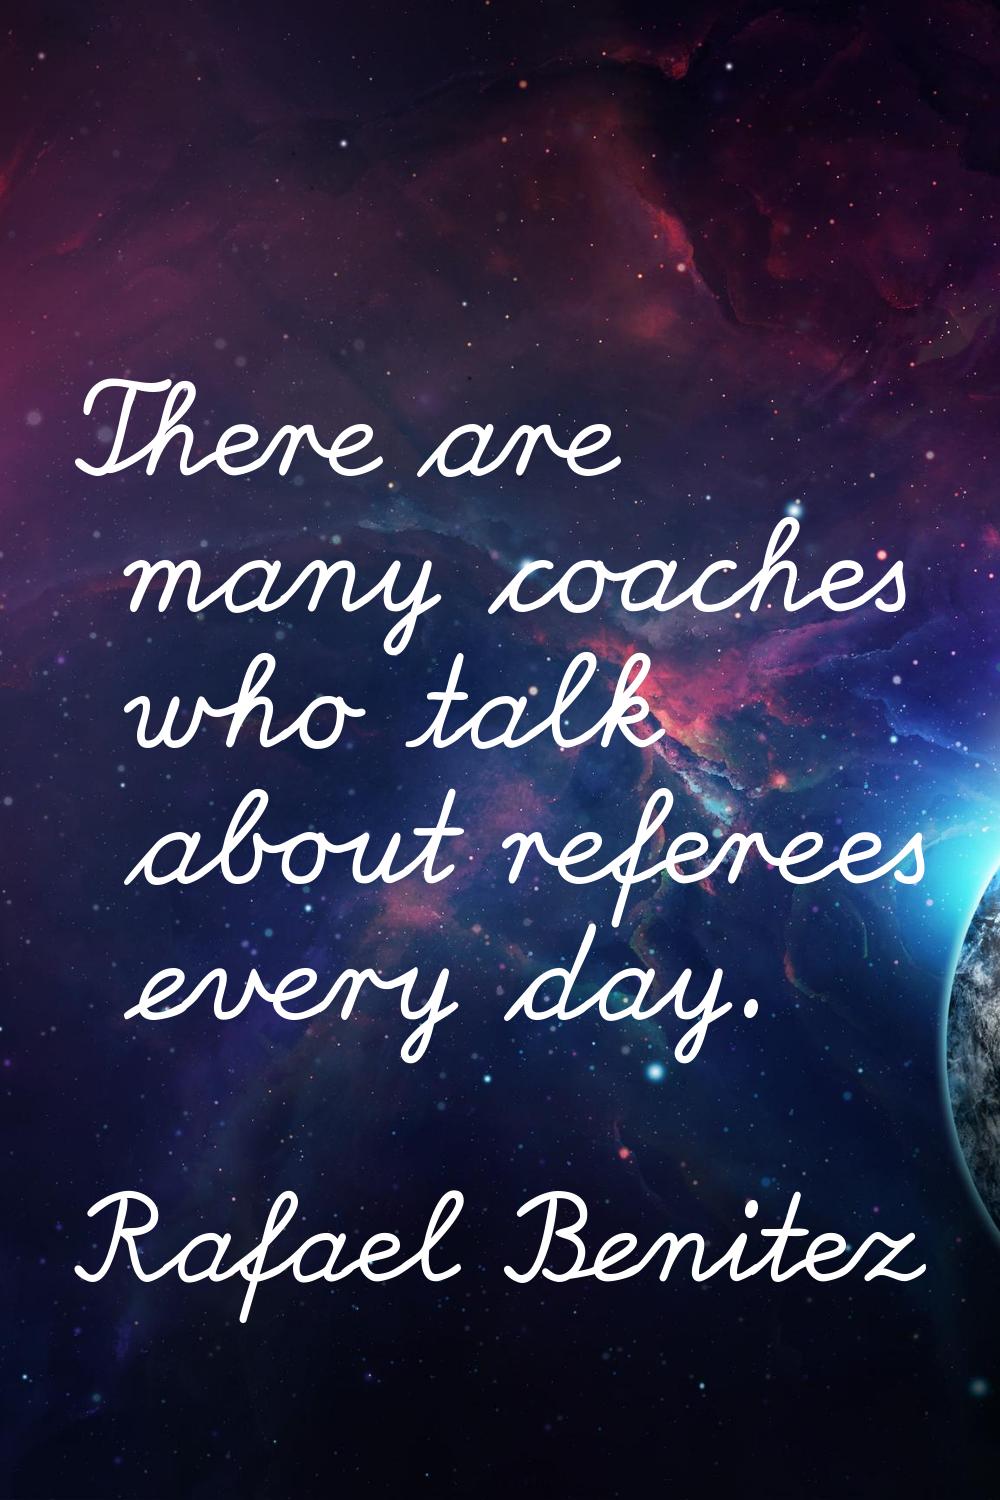 There are many coaches who talk about referees every day.